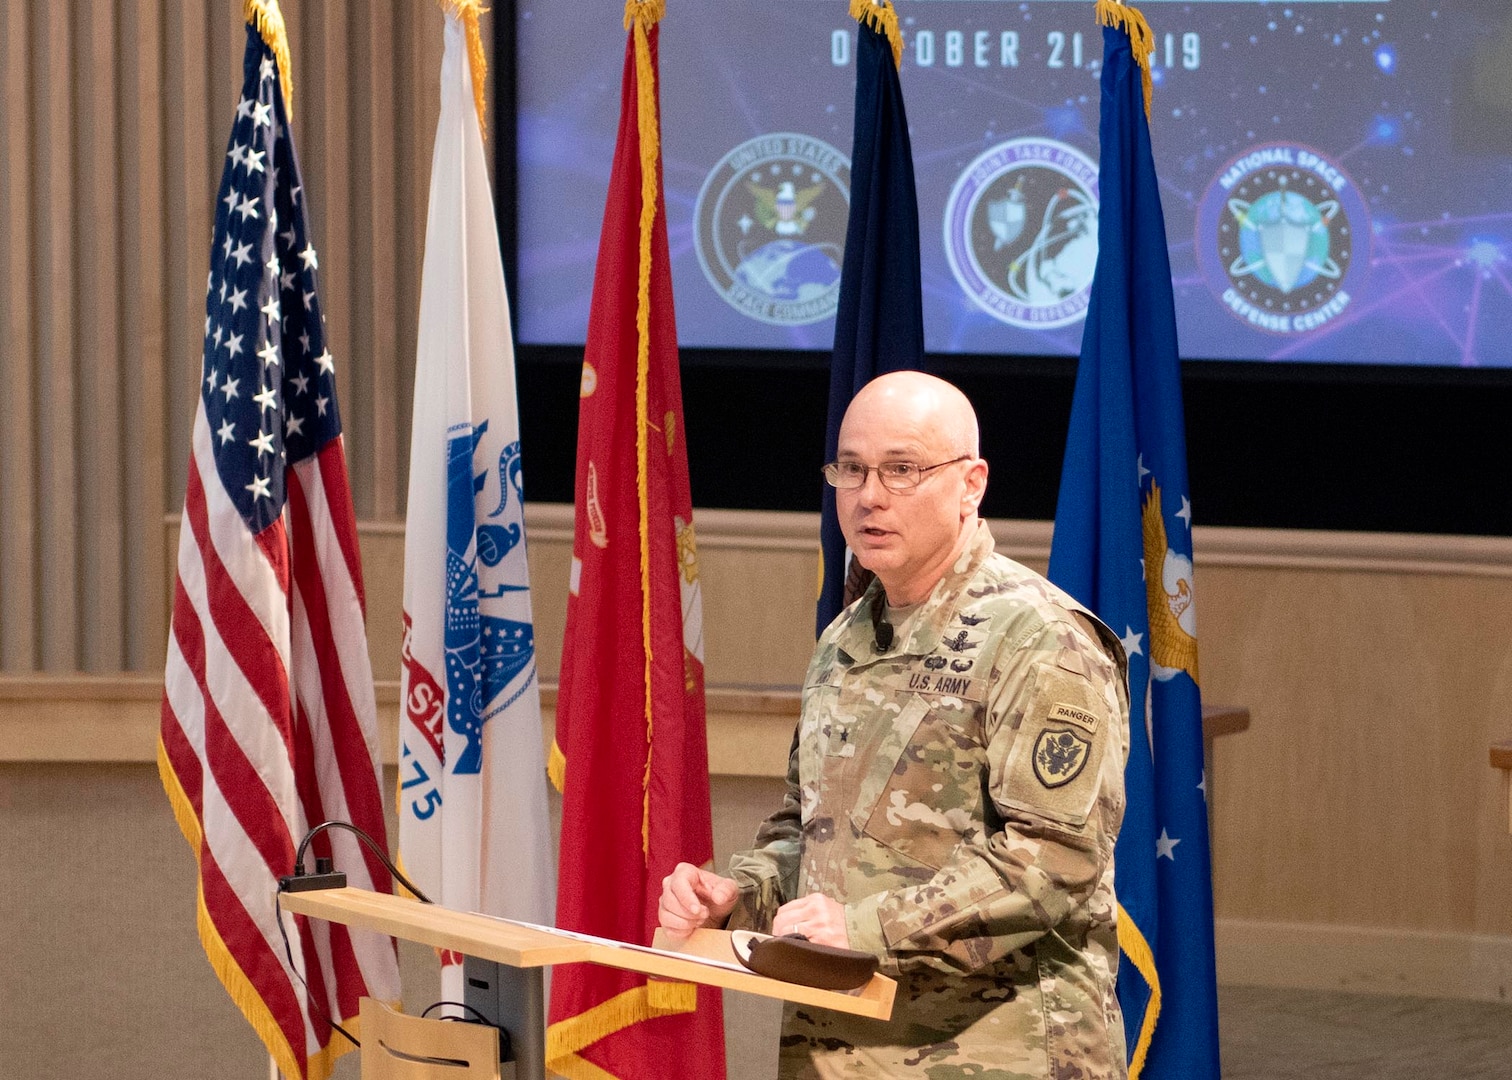 U.S. Army BG James Thomas delivers remarks to recognize the establishment of Joint Task Force Space Defense during a ceremony held at Shriever Air Force Base, Colo., Oct. 21, 2019. Joint Task Force Space Defense is one of two subordinate commands to USSPACECOM with a mission to conduct space superiority operations. (DoD photo by Patrick Morrow)